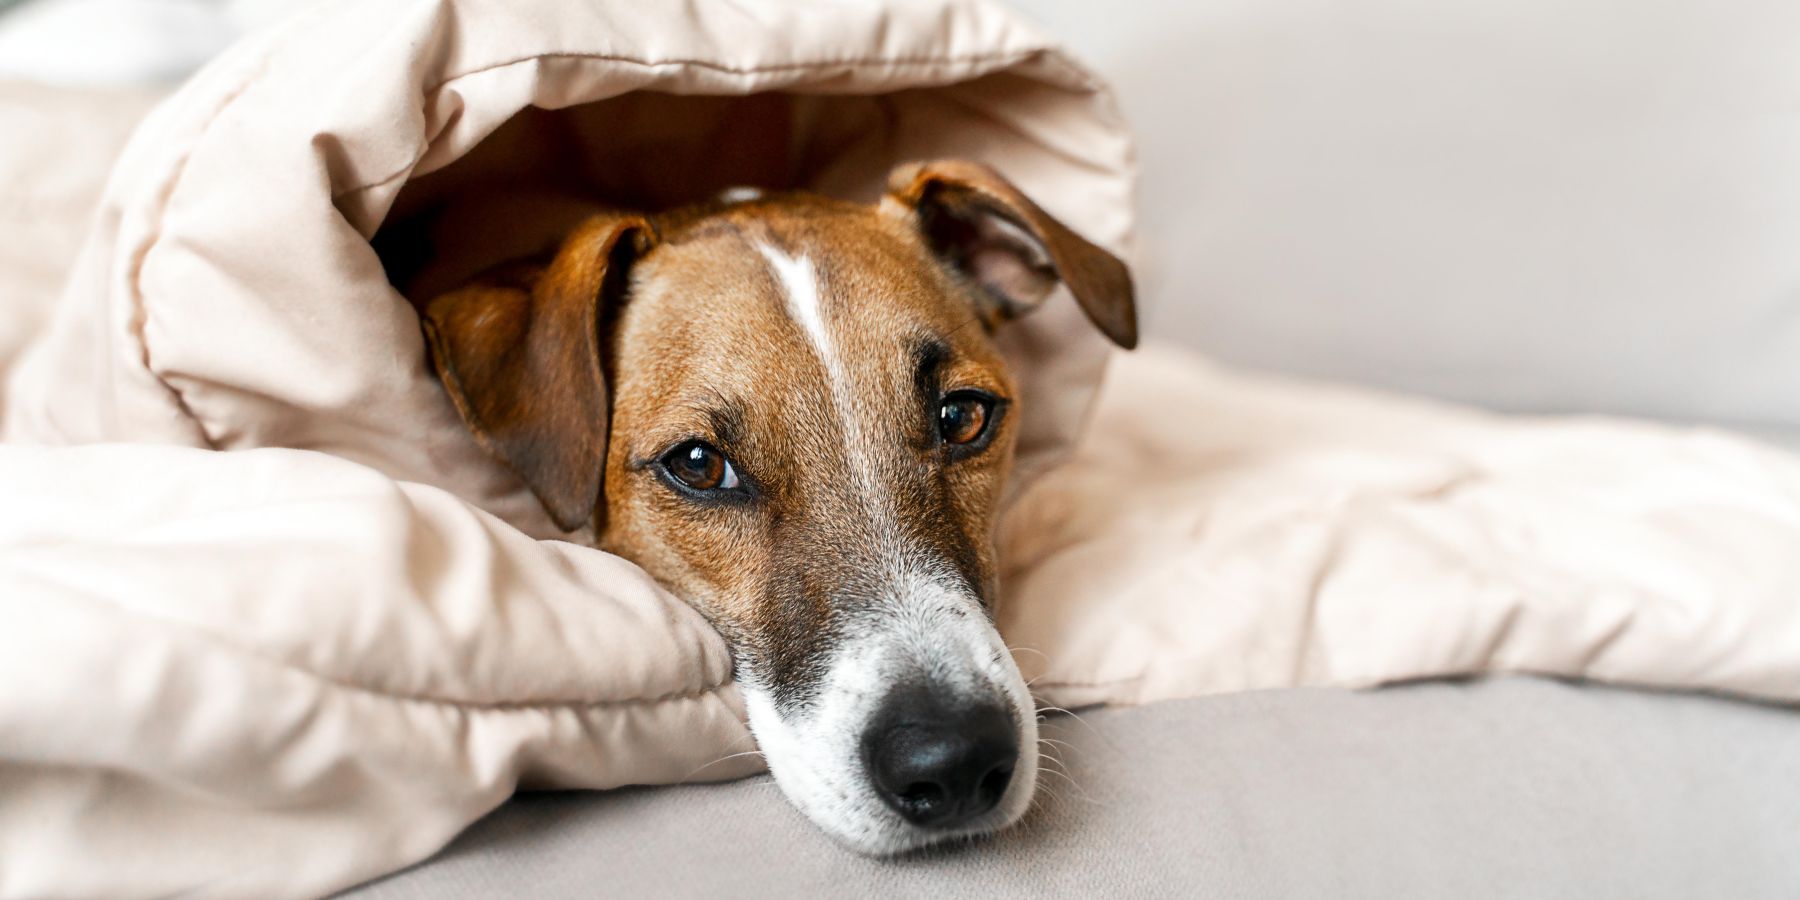 Home Remedies and Care Strategies for a Coughing Canine